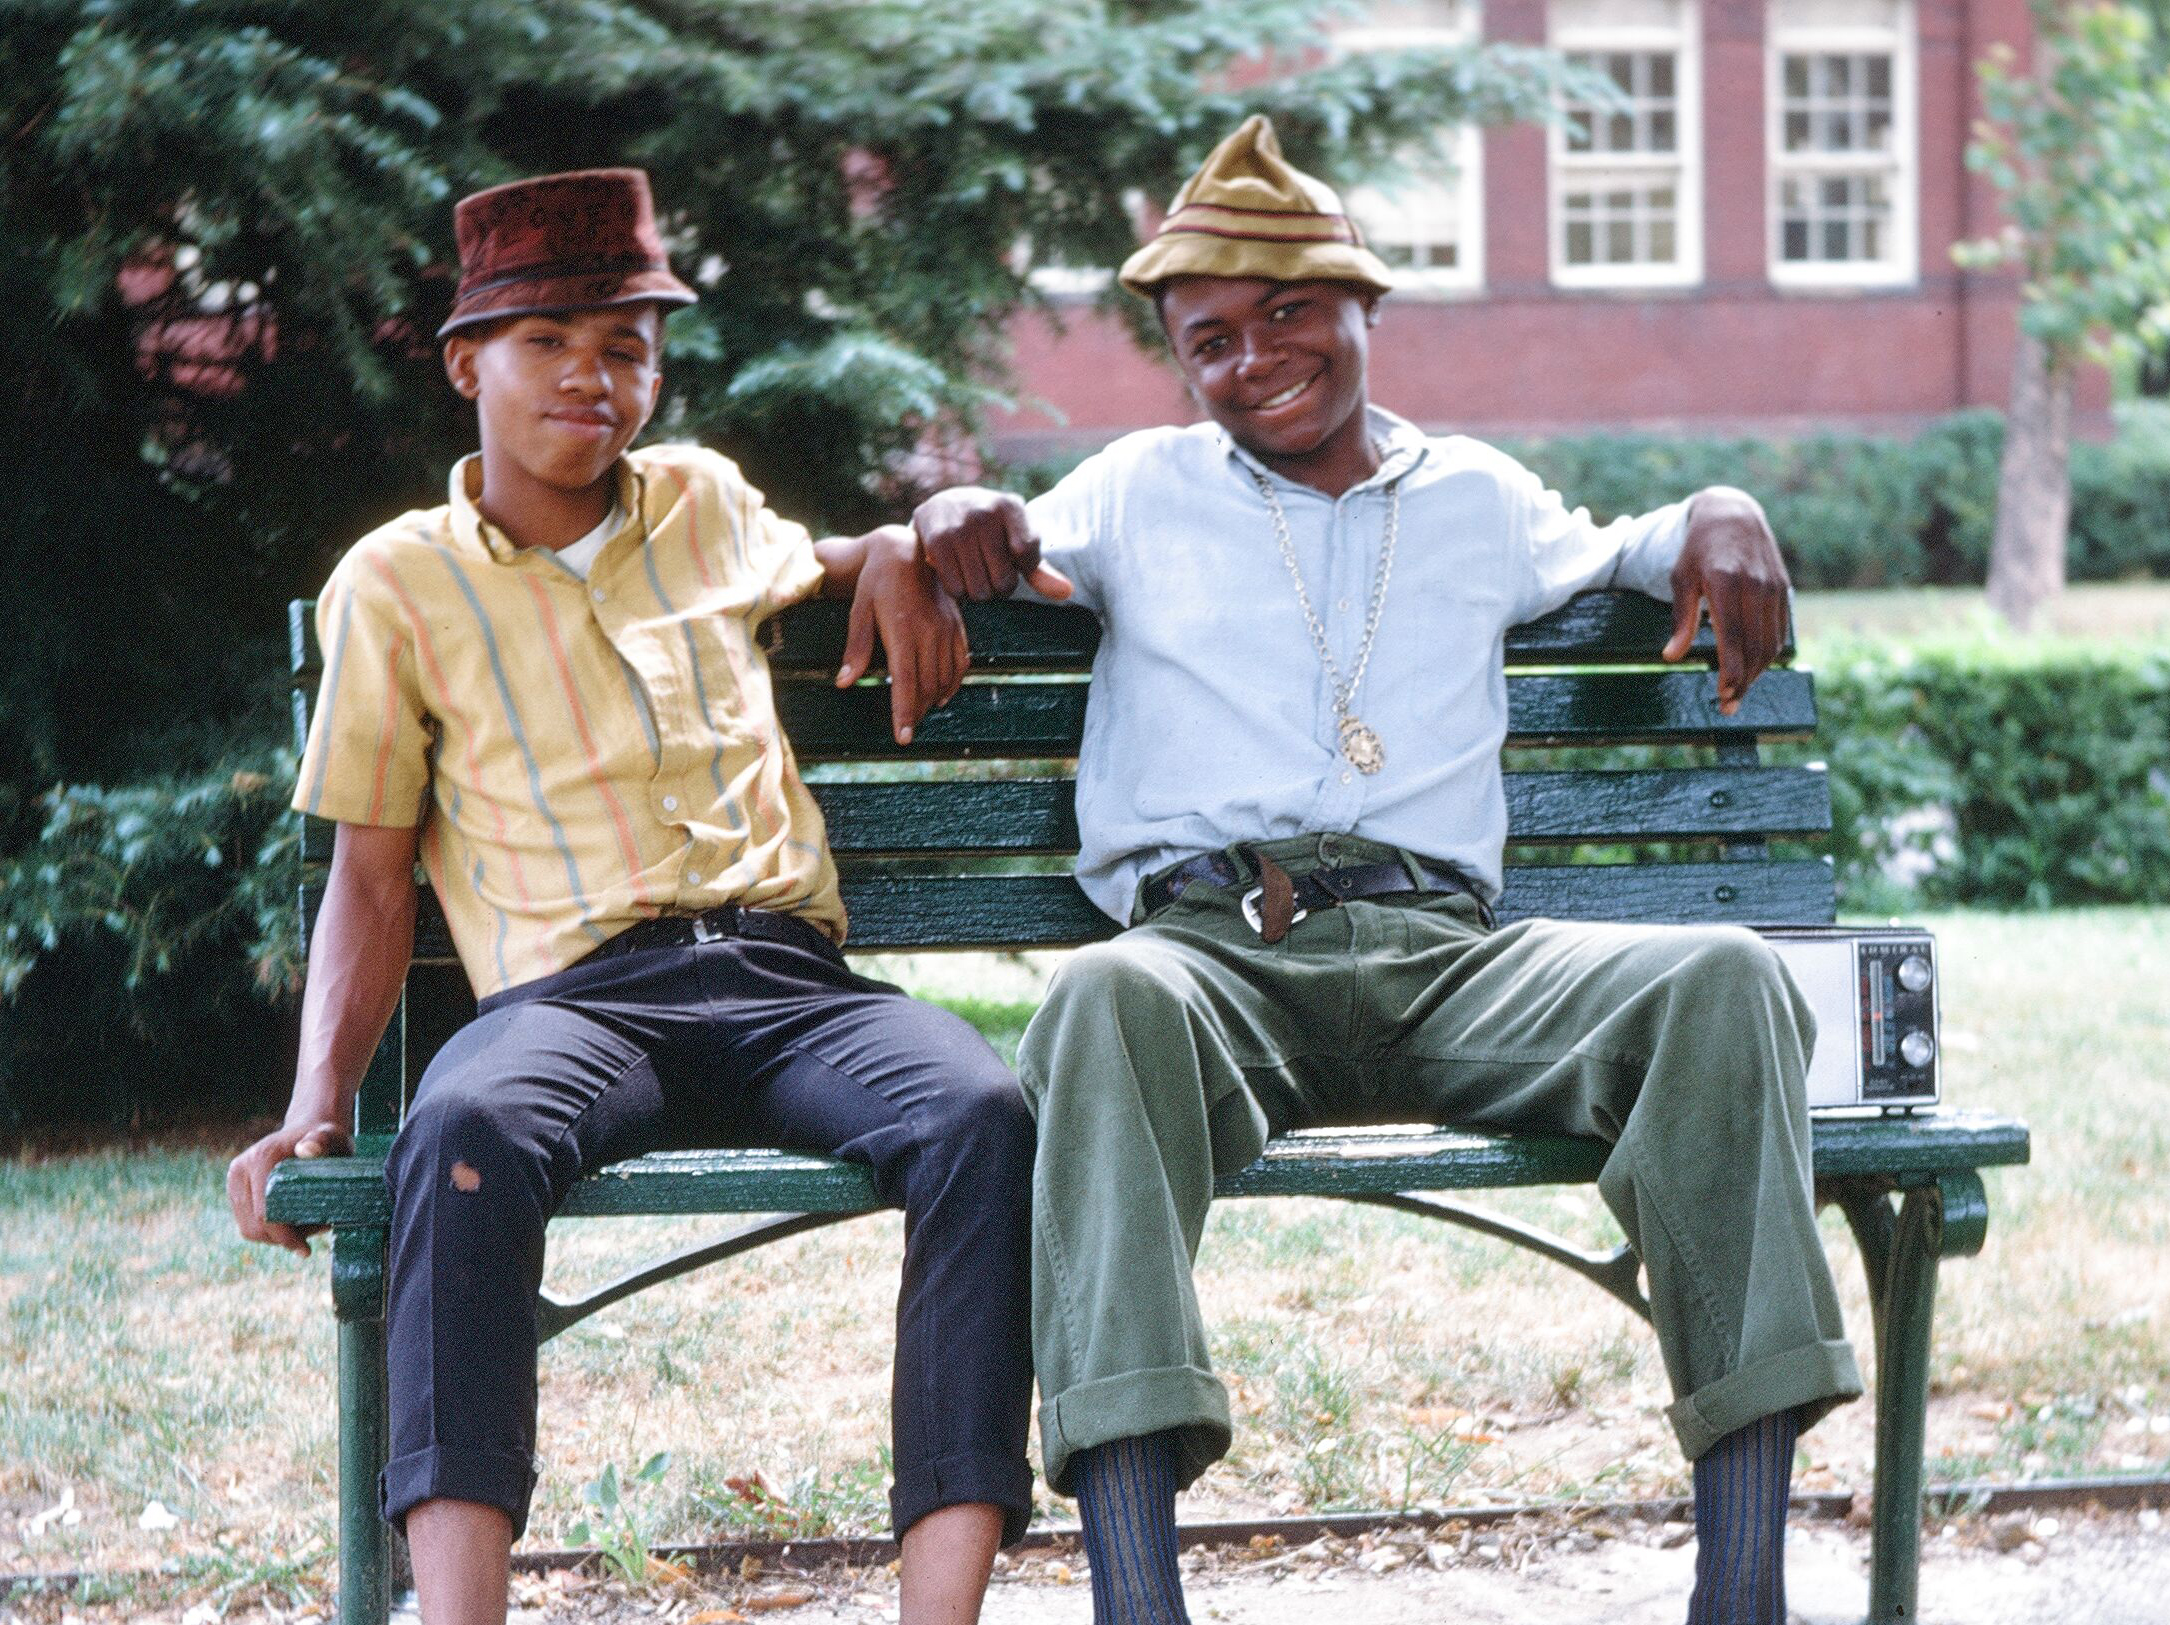 Teenagers on a park bench in Washington, DC.